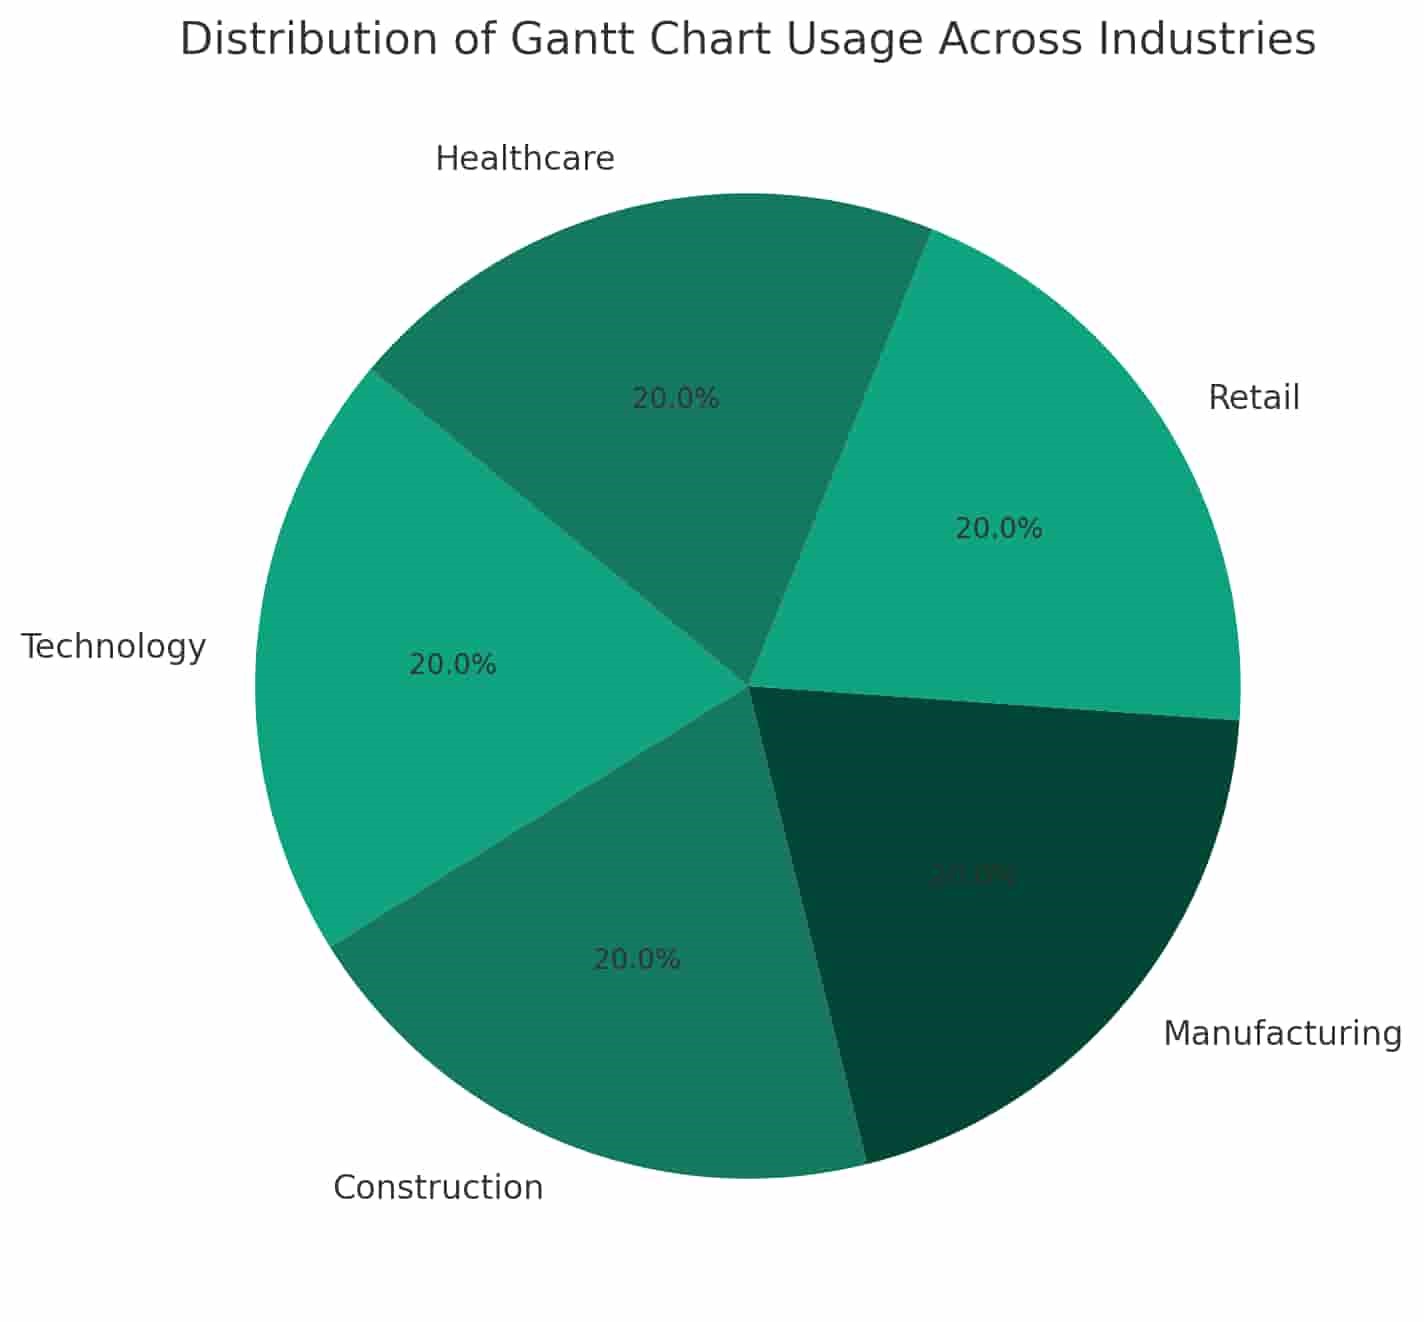 Gantt Charts are Utilized by Tech Companies